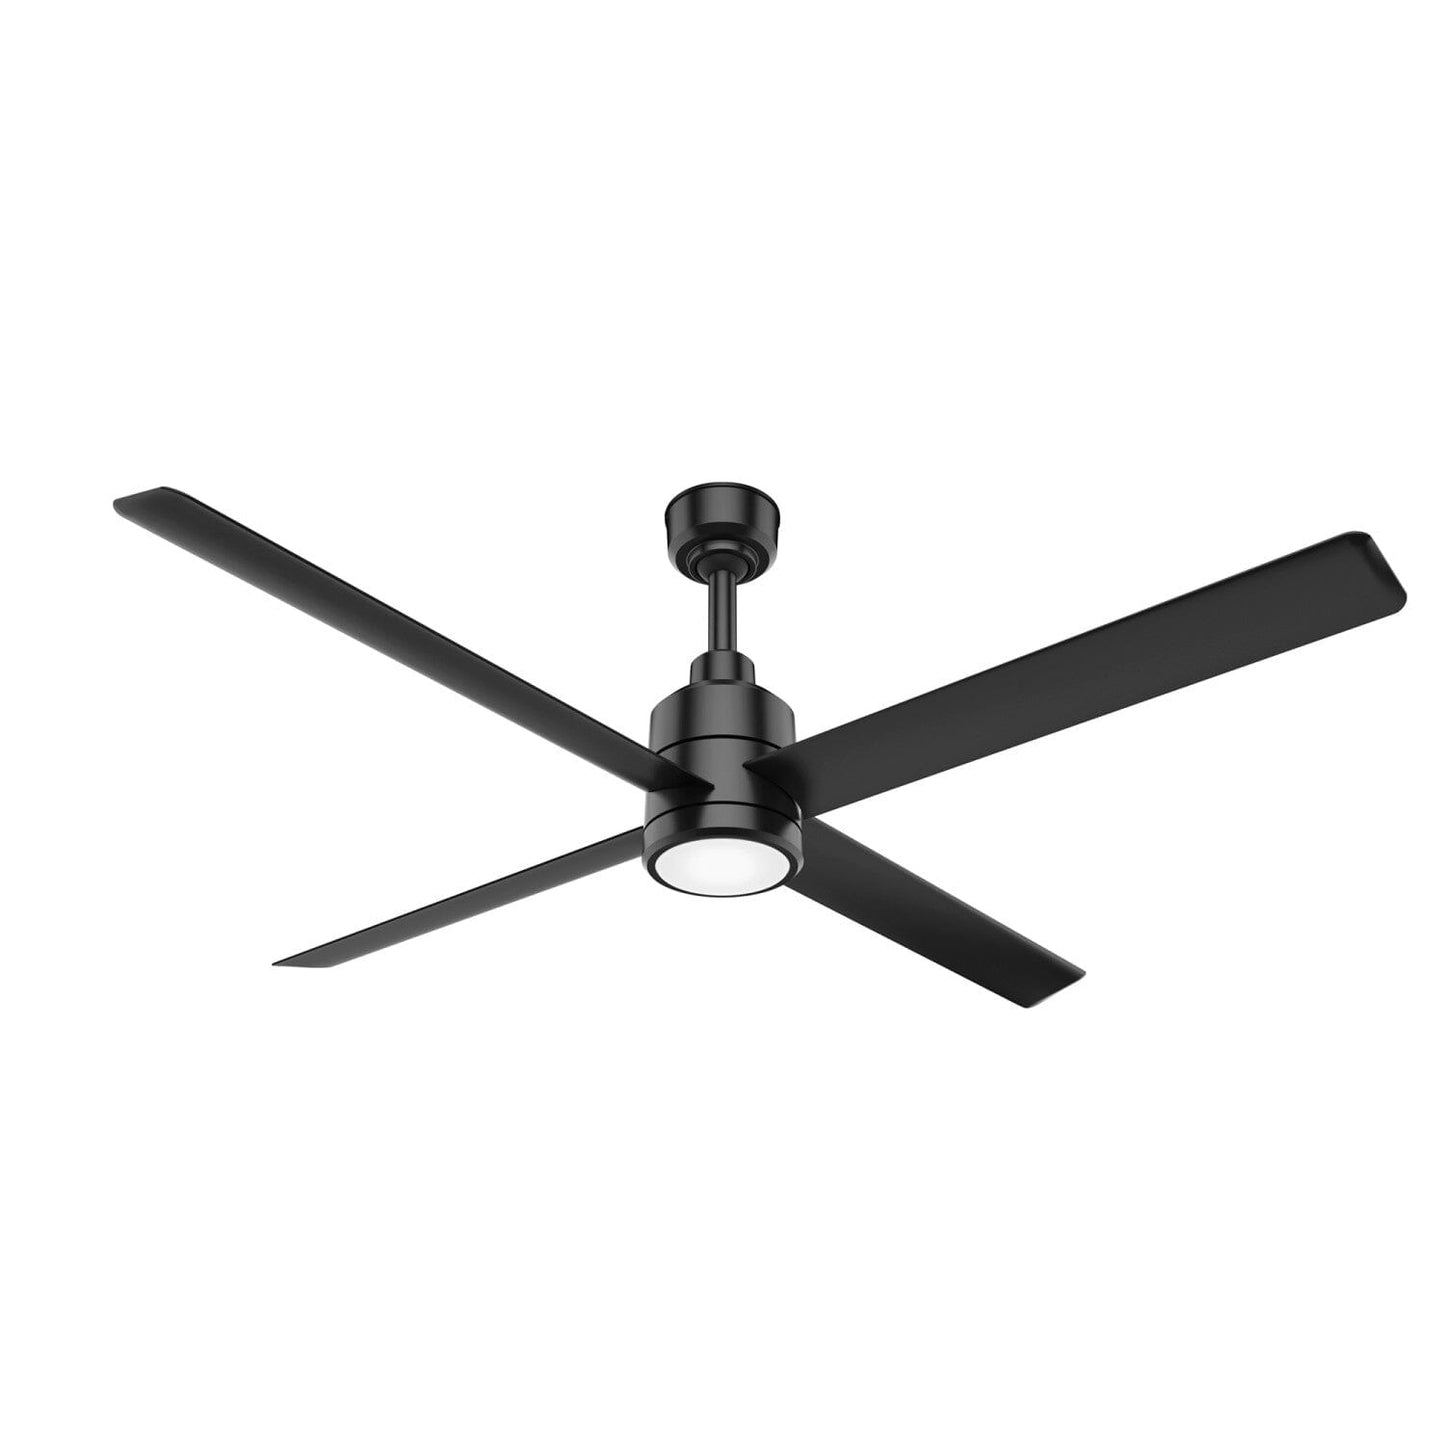 Trak Outdoor with light 84 inches 120V Ceiling Fans Hunter Black - Black 